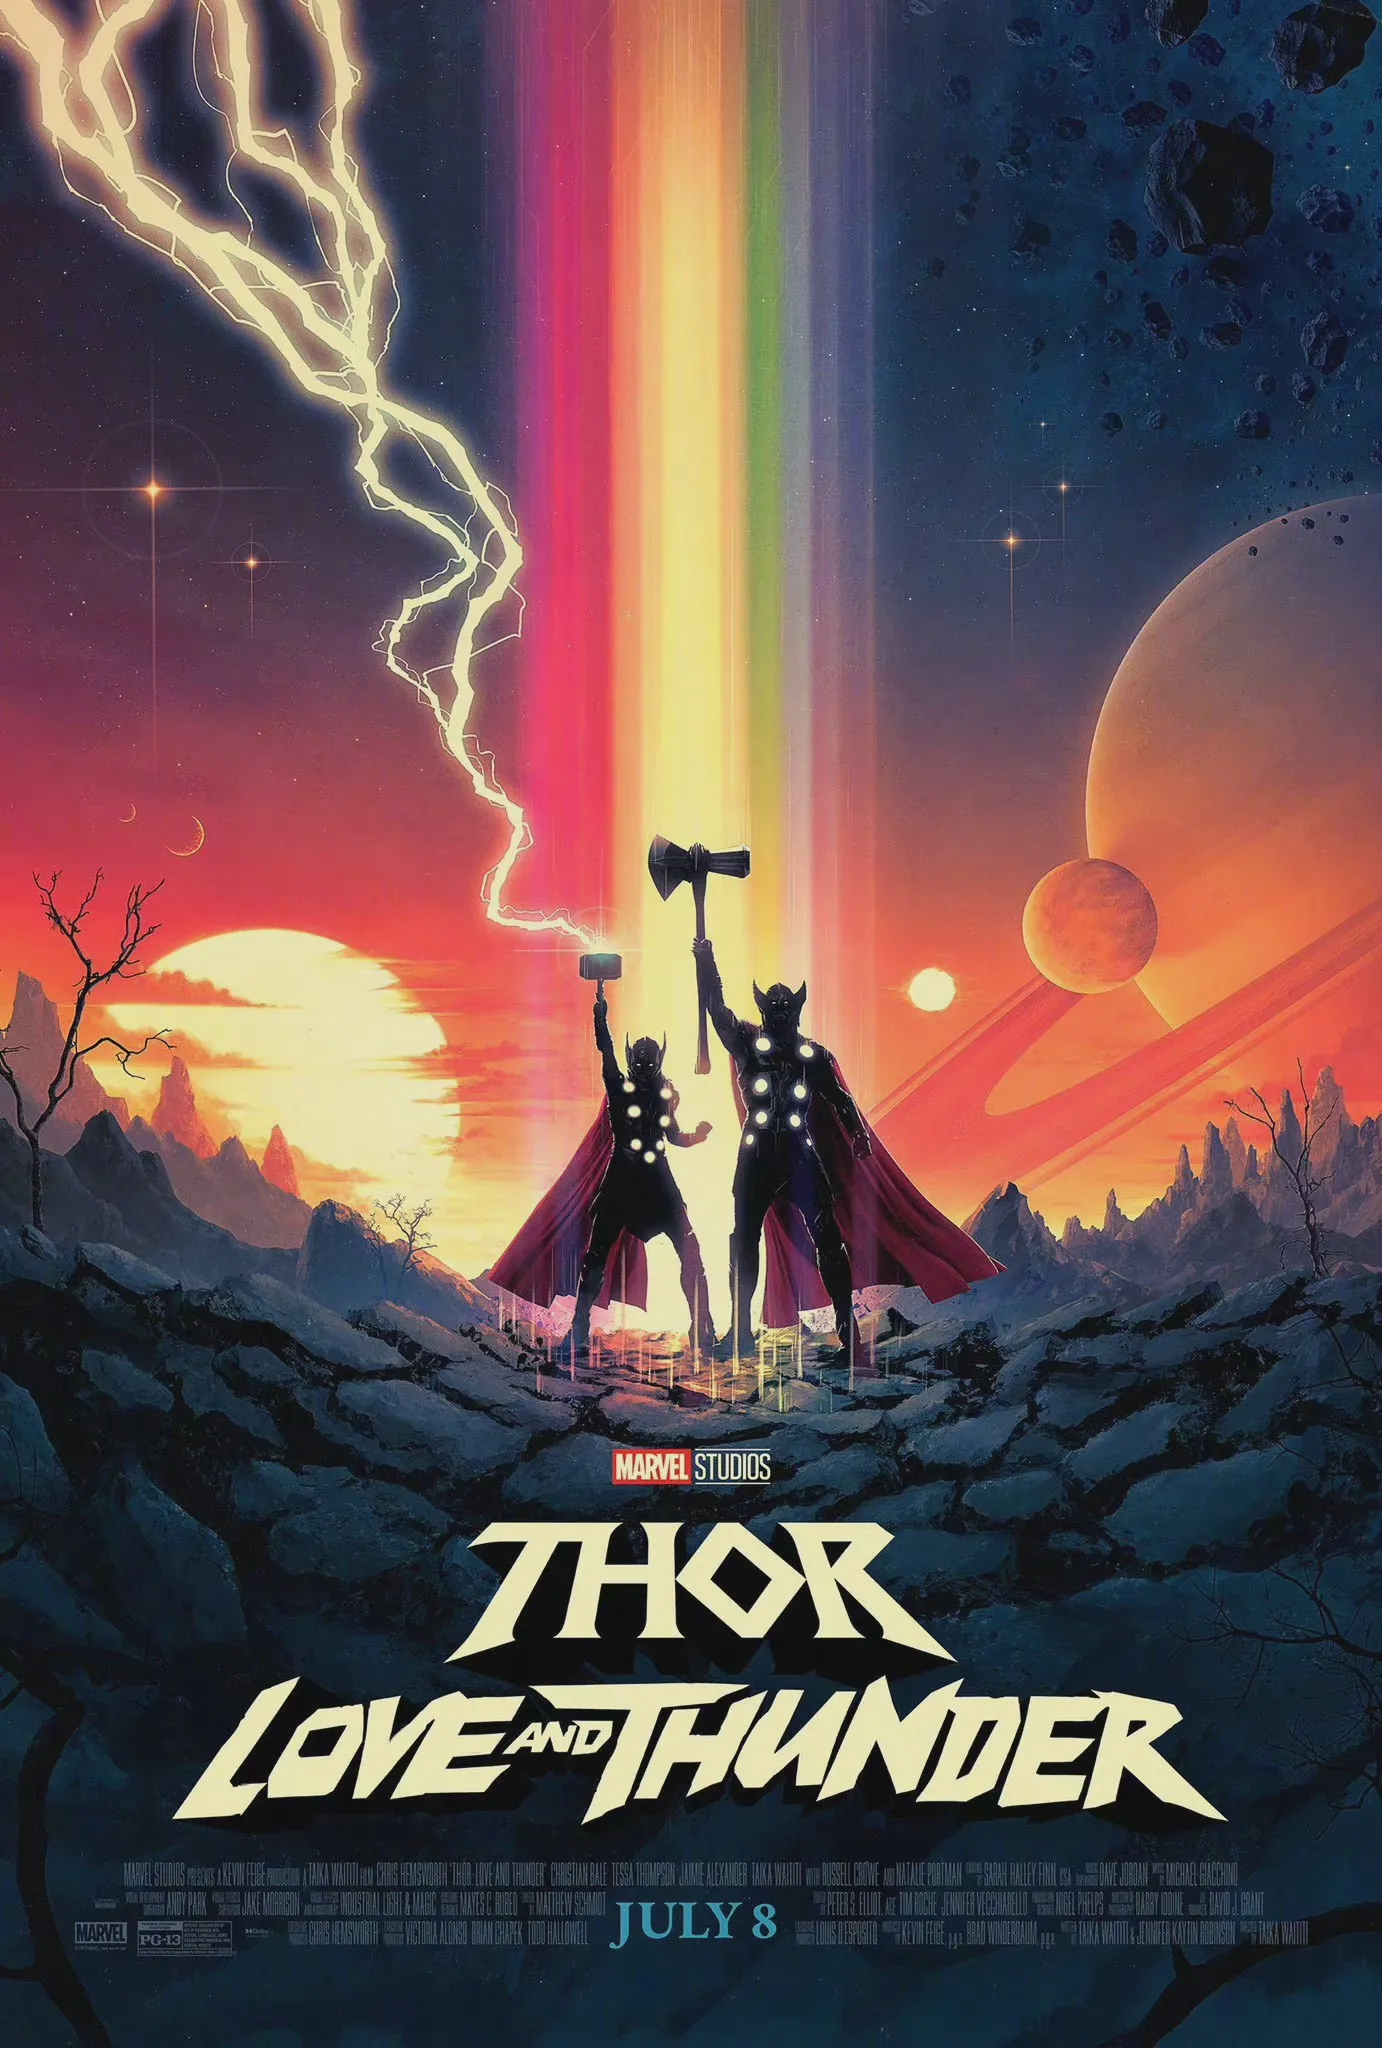 "Thor: Love and Thunder" Northern America early-stage box office | FMV6